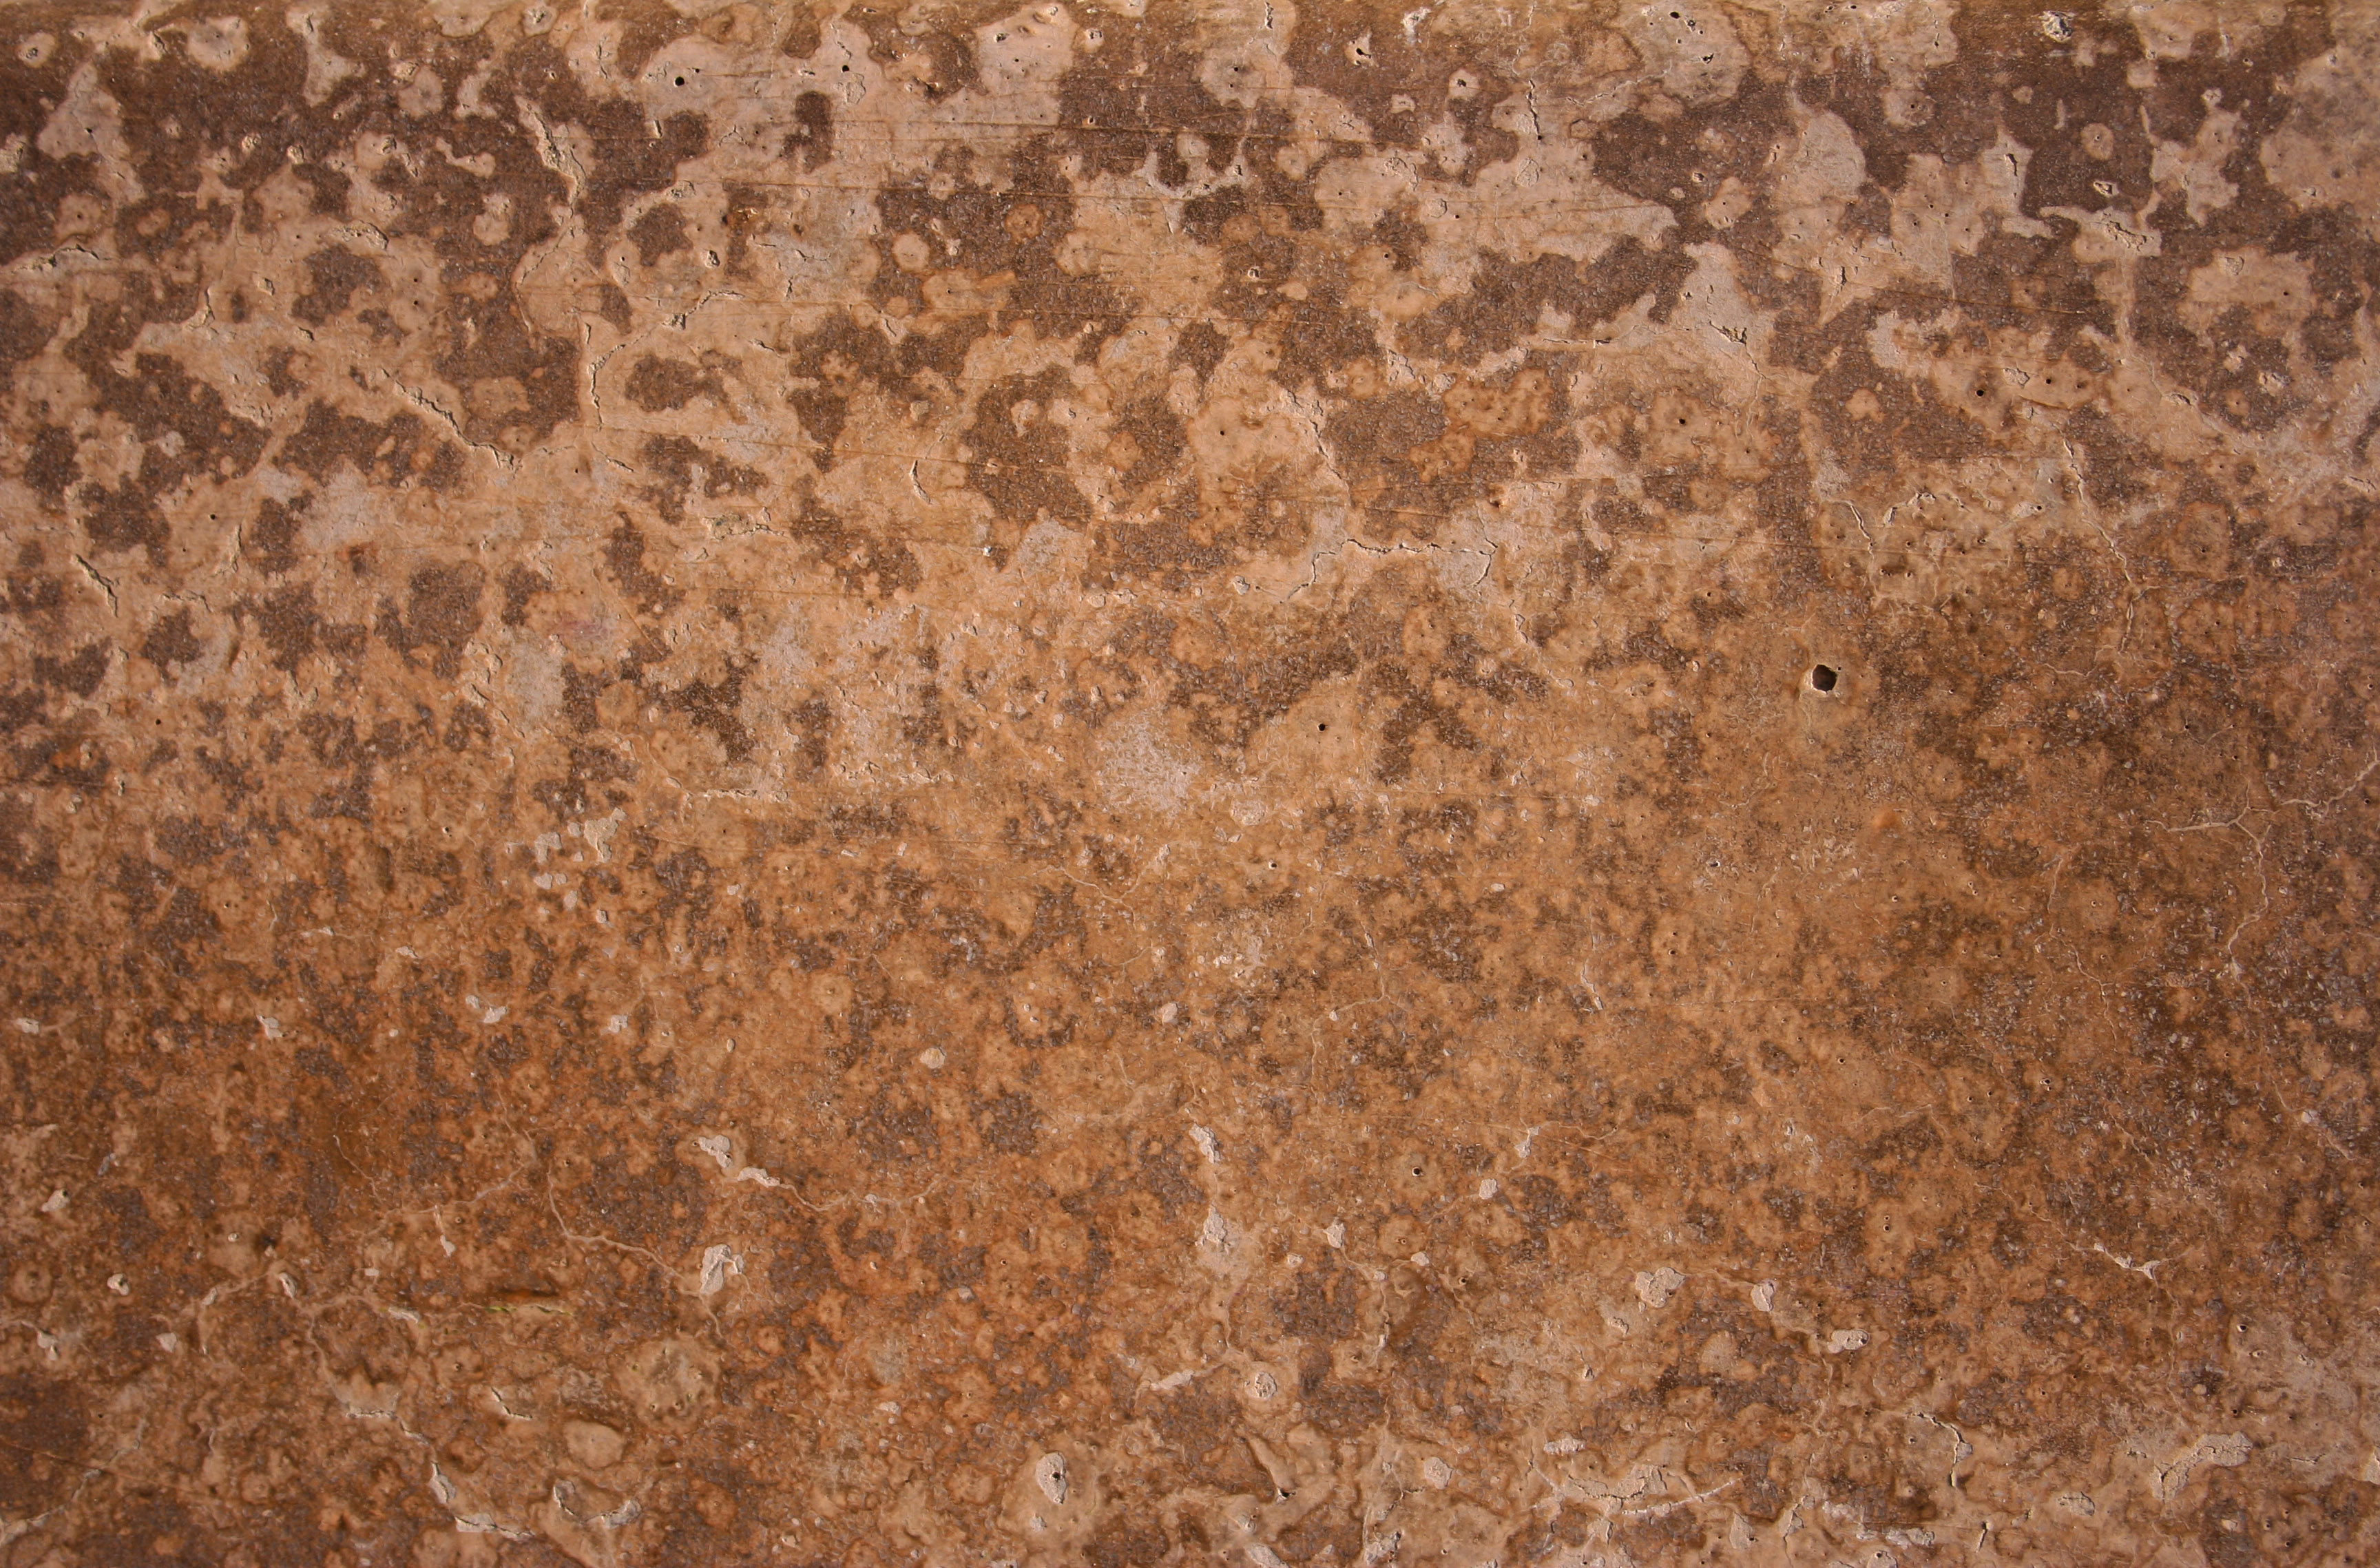 stained concrete texture stock image rock stone grunge brown cracked ...